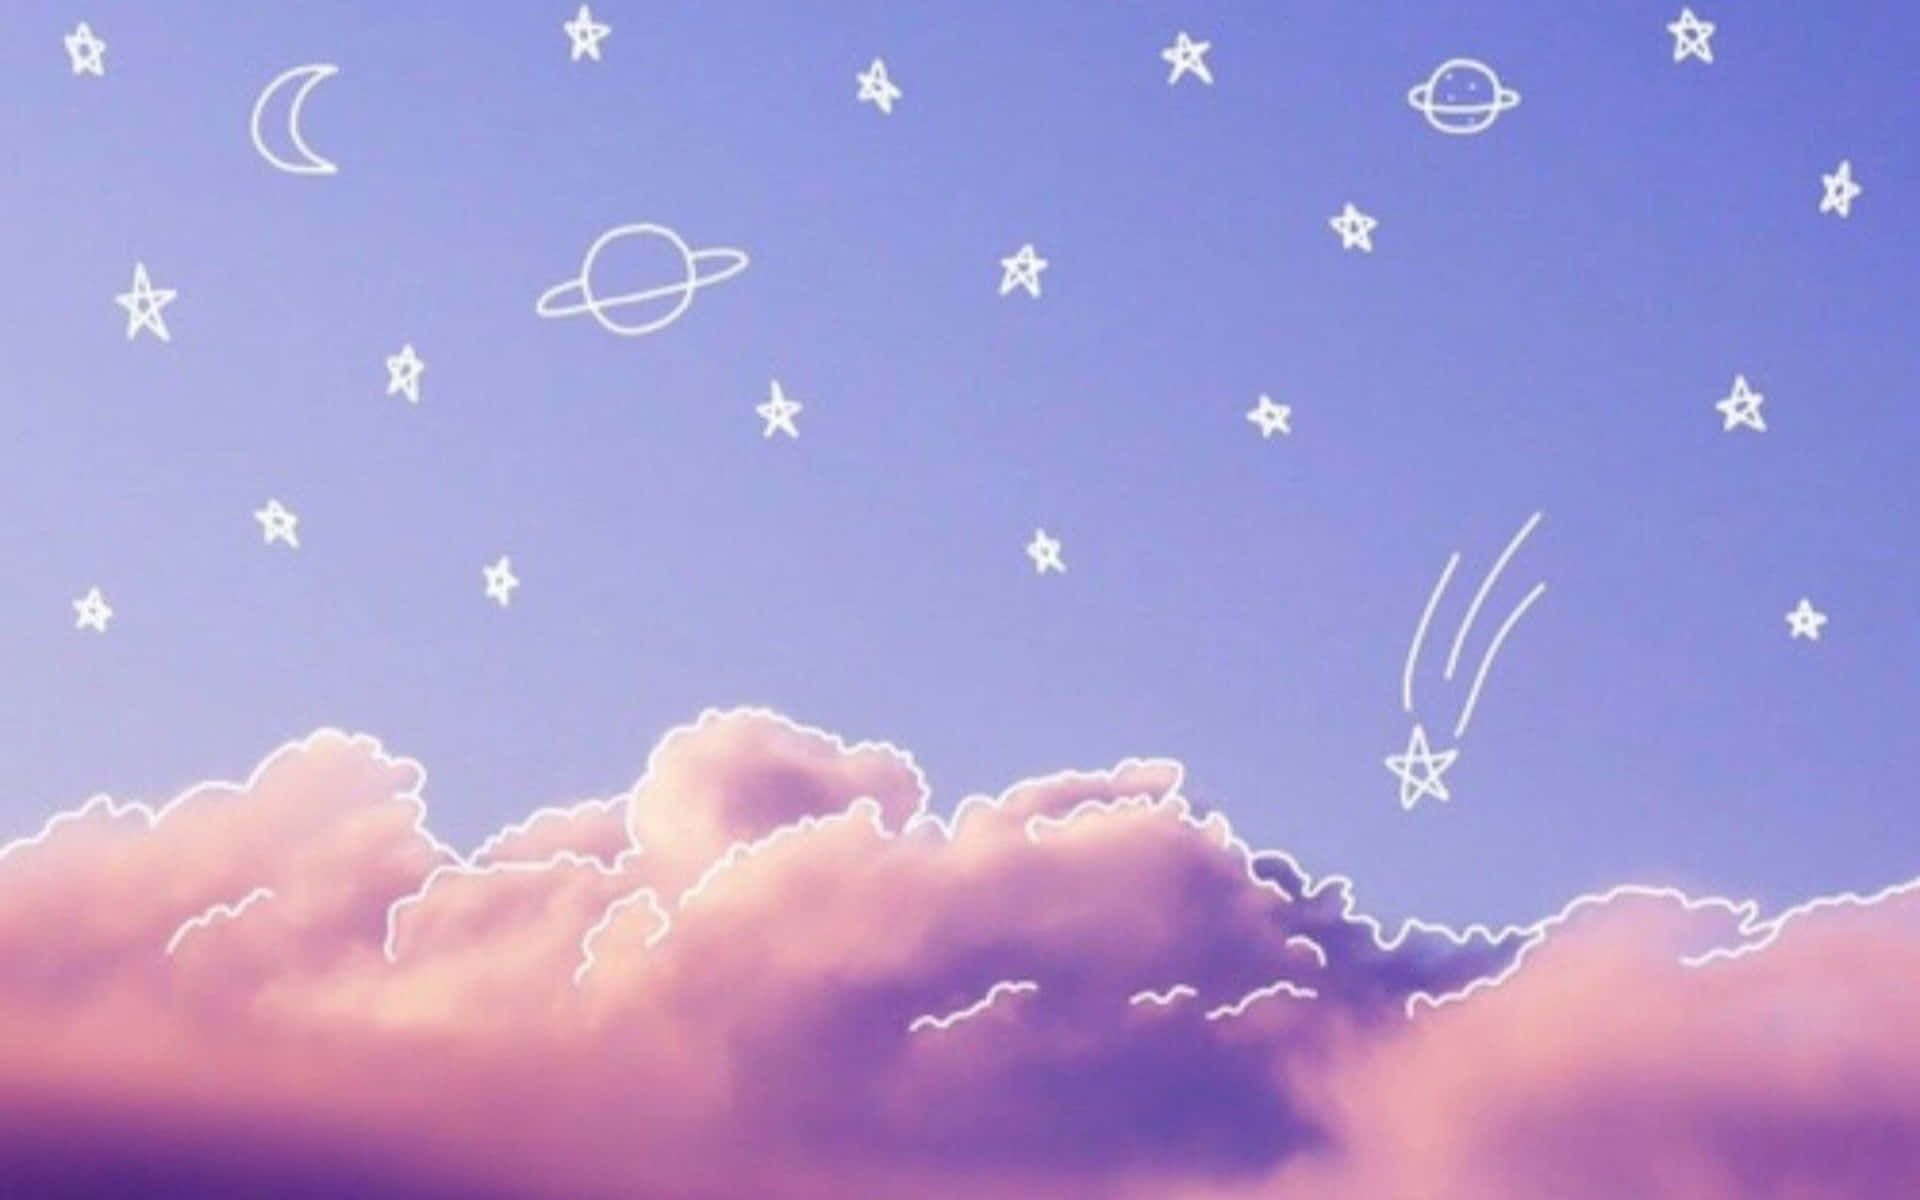 Kawaii Aesthetic And Clouds Background